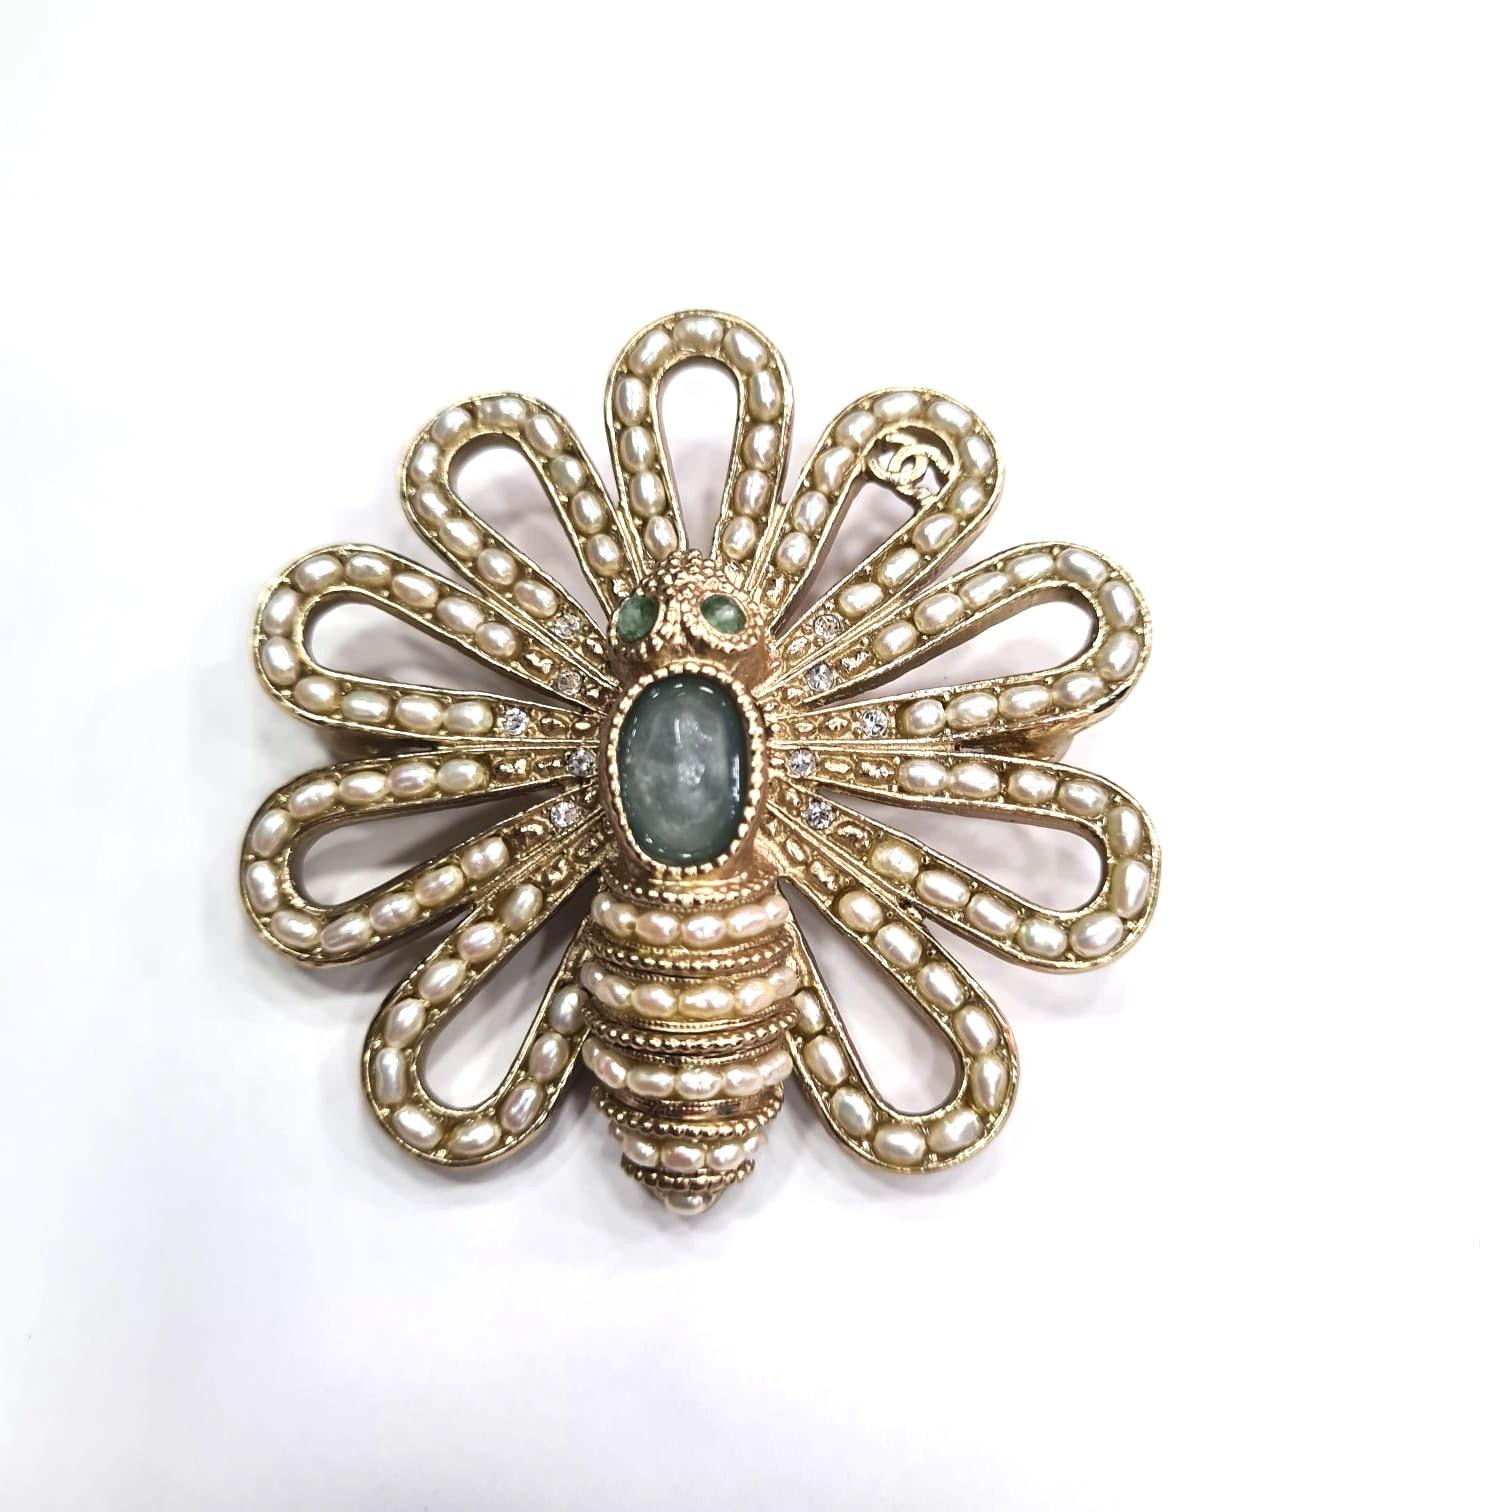 Delicate Chanel brooch crafted in gilt metal with glass beads and pale green quartz (eyes and body). In very good condition. Diameter of the brooch is 5.5 cm. This lovely butterfly is hallmarked Fall Winter 2018, Made in France and will be delivered